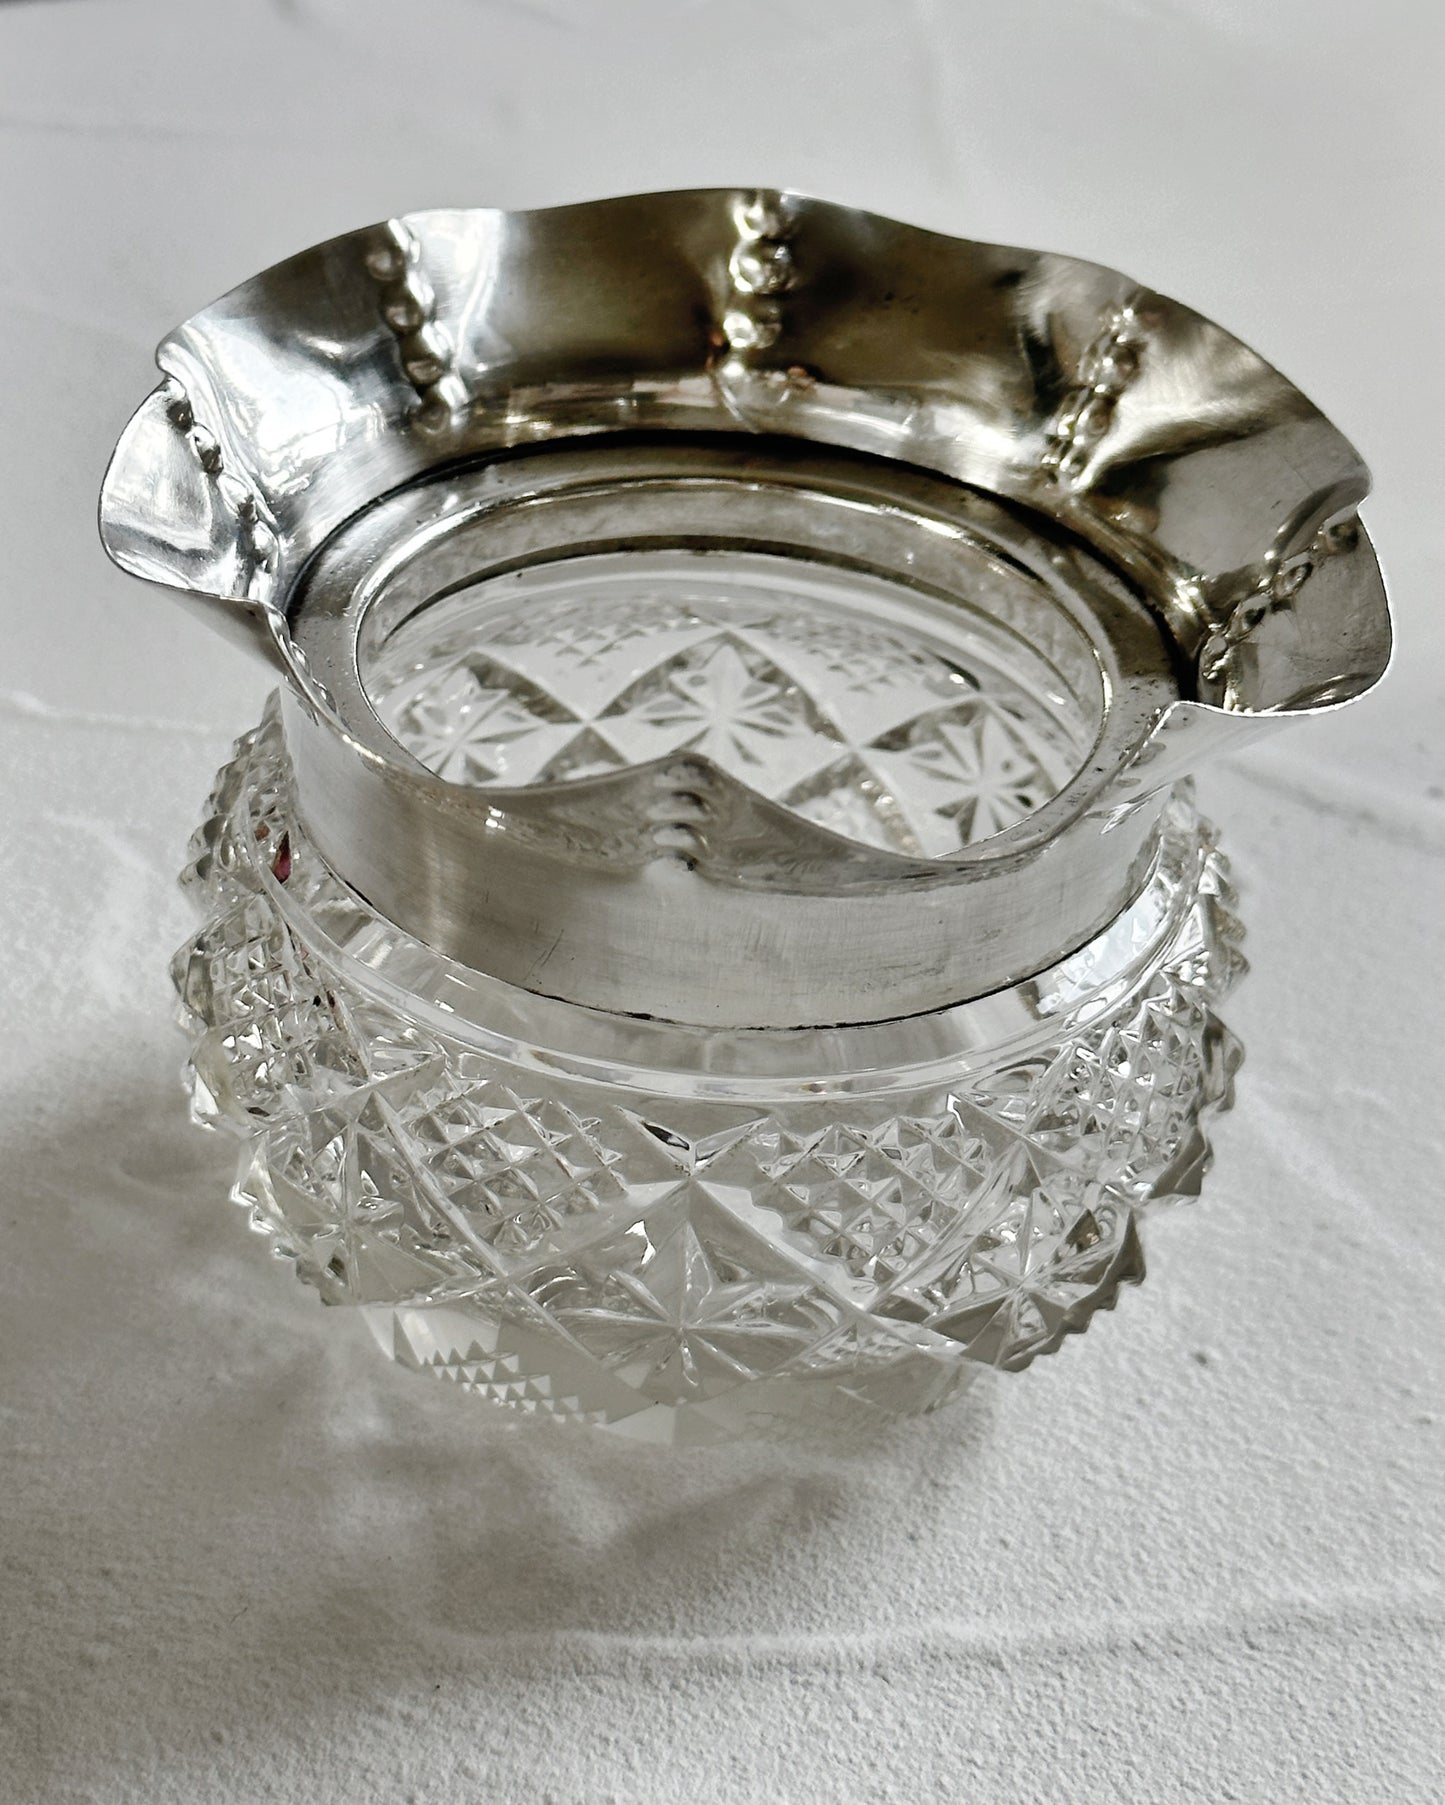 Antique 1903 Edwardian sterling silver and cut glass candy bowl